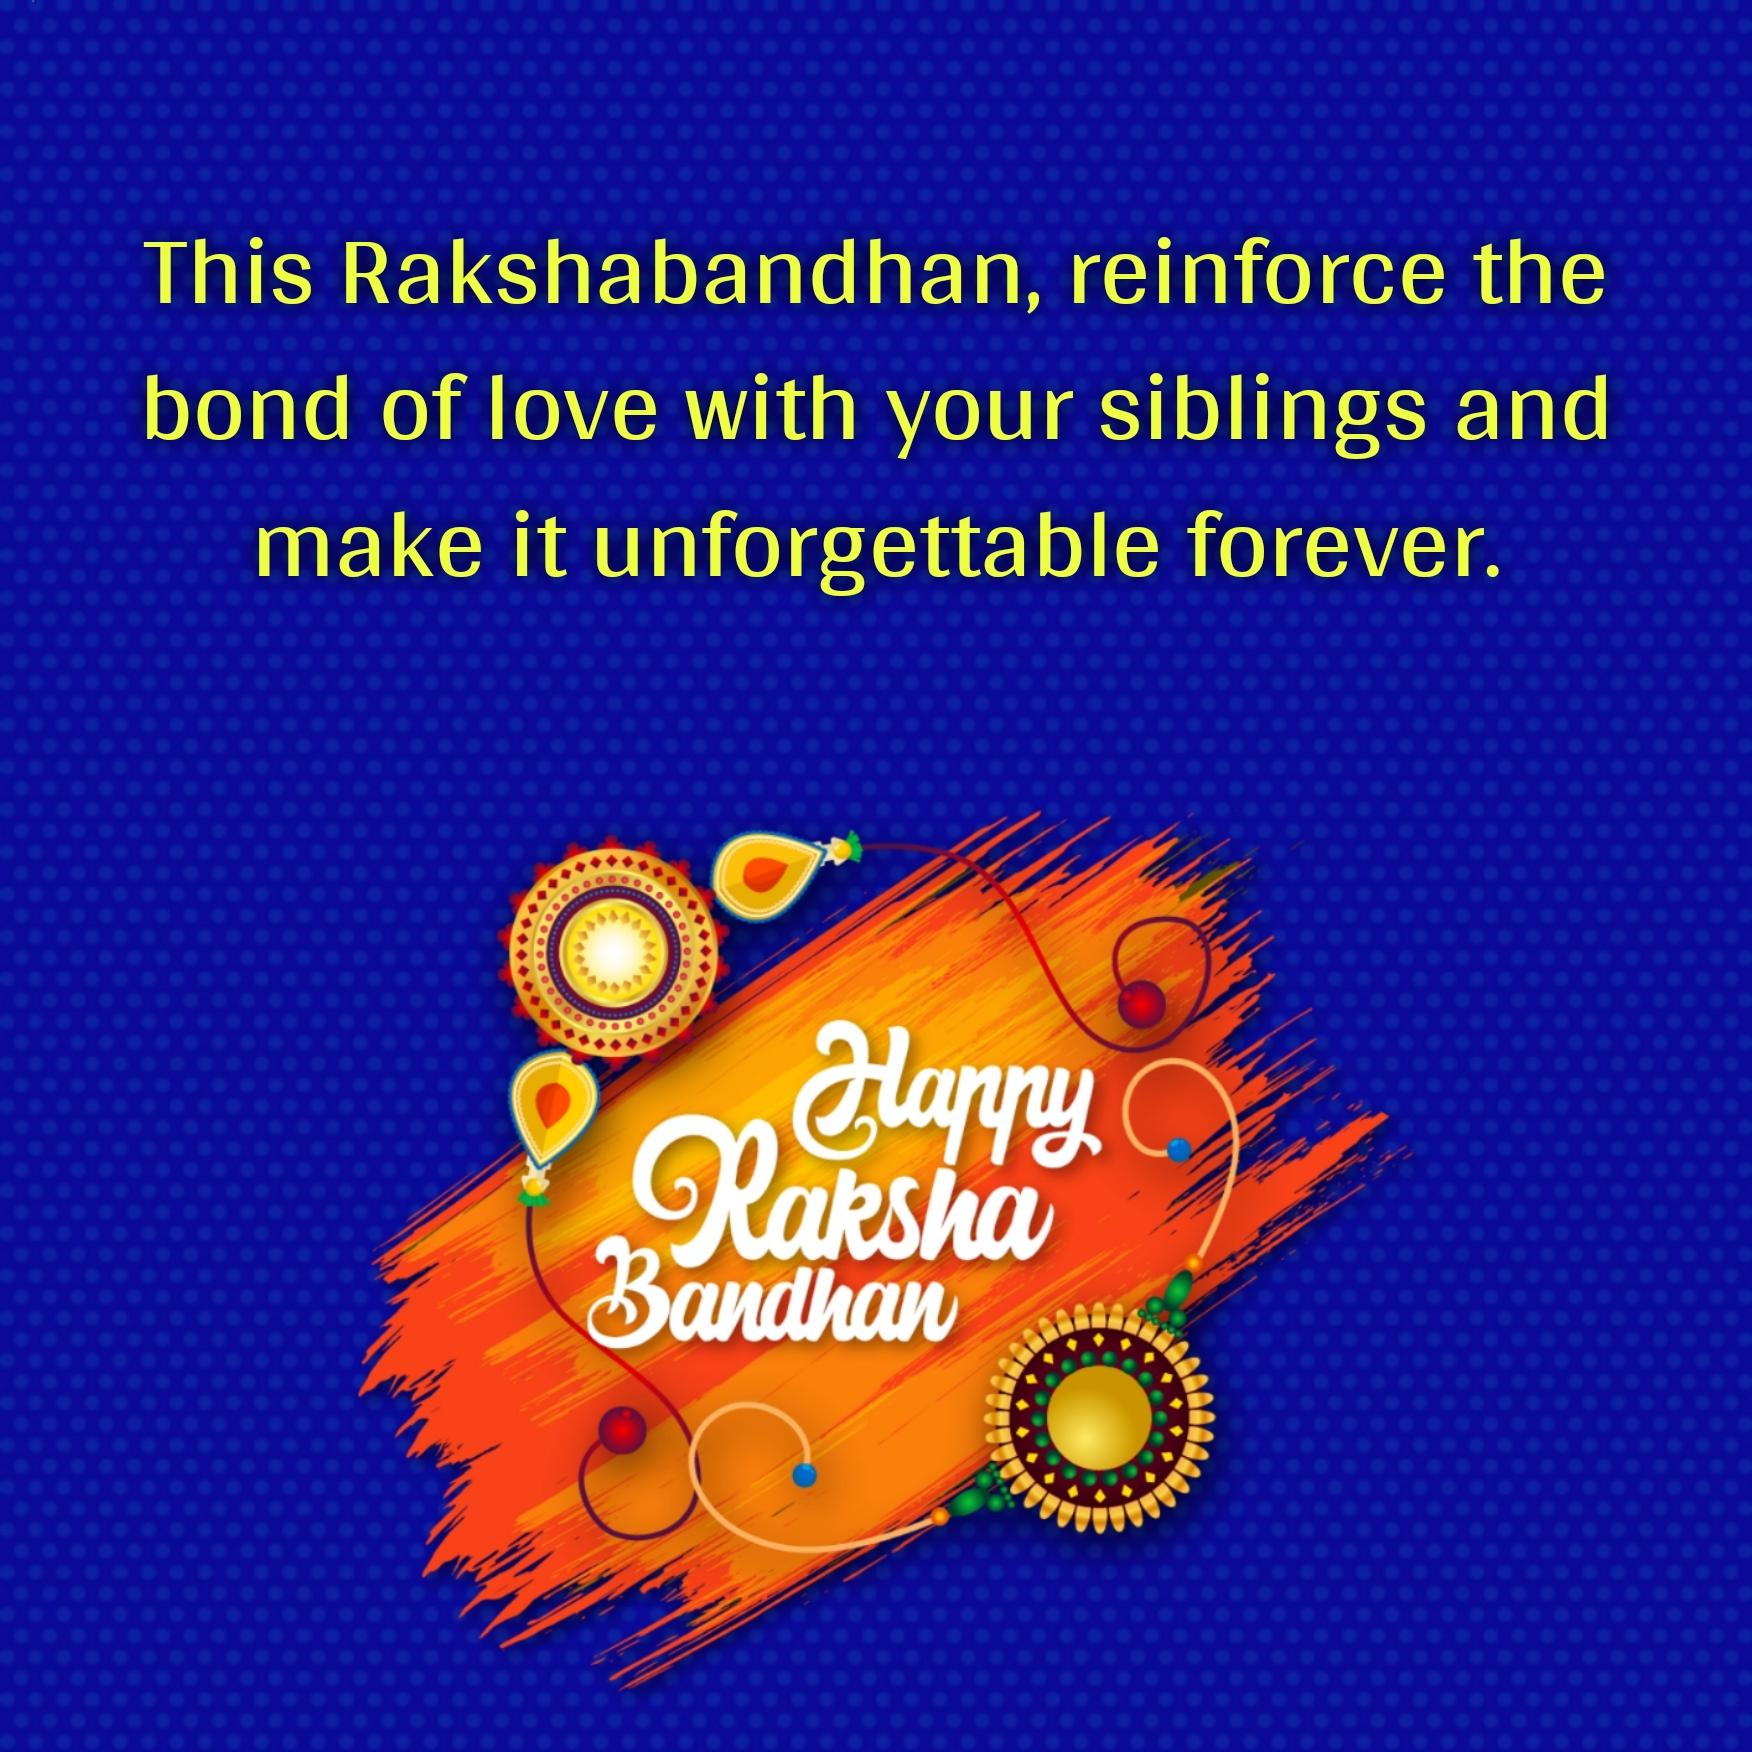 This Rakshabandhan reinforce the bond of love with your siblings